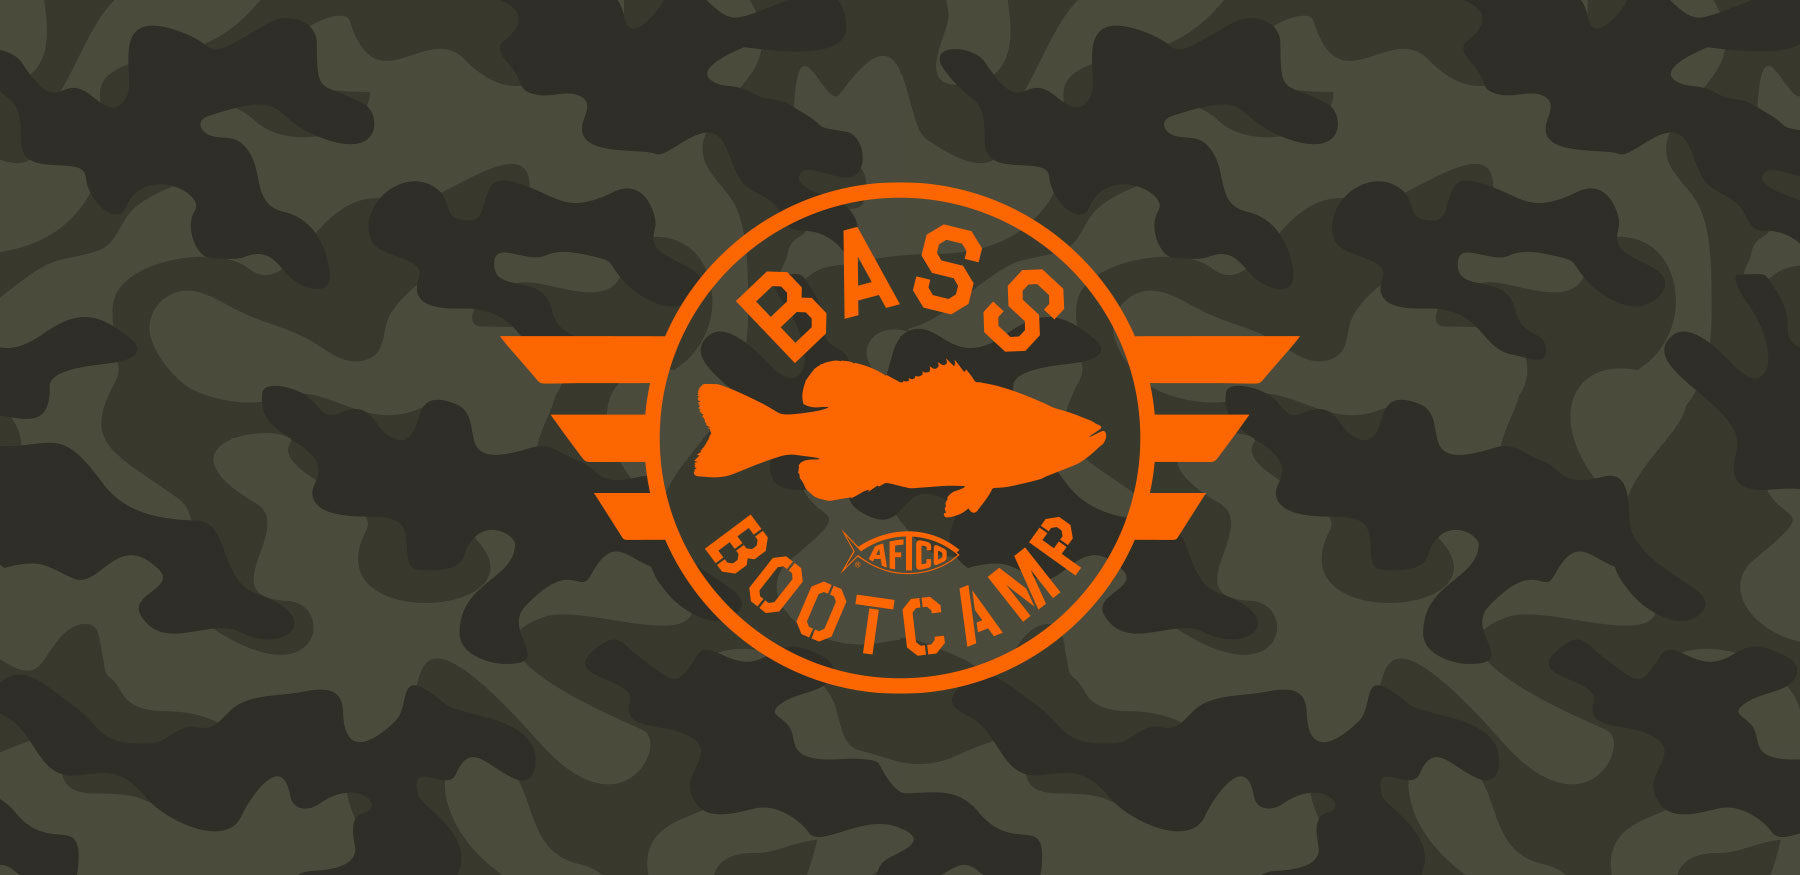 AFTCO Bass Boot Camp - Become A Professional Bass Angler